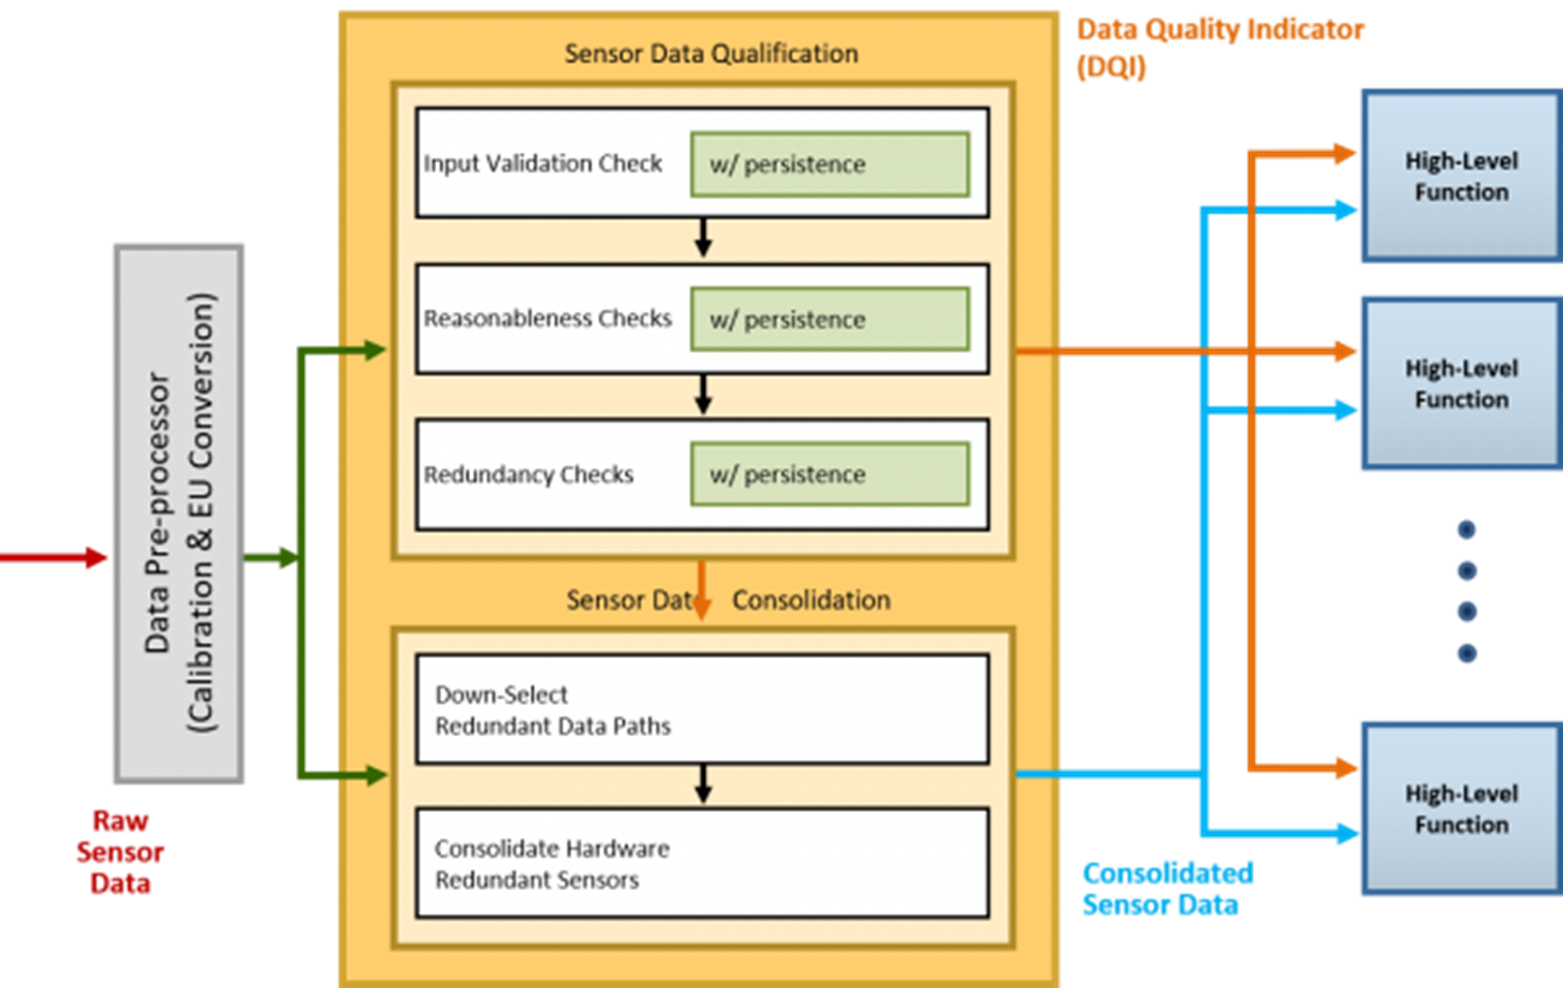 Flow chart showing the data qualification process.